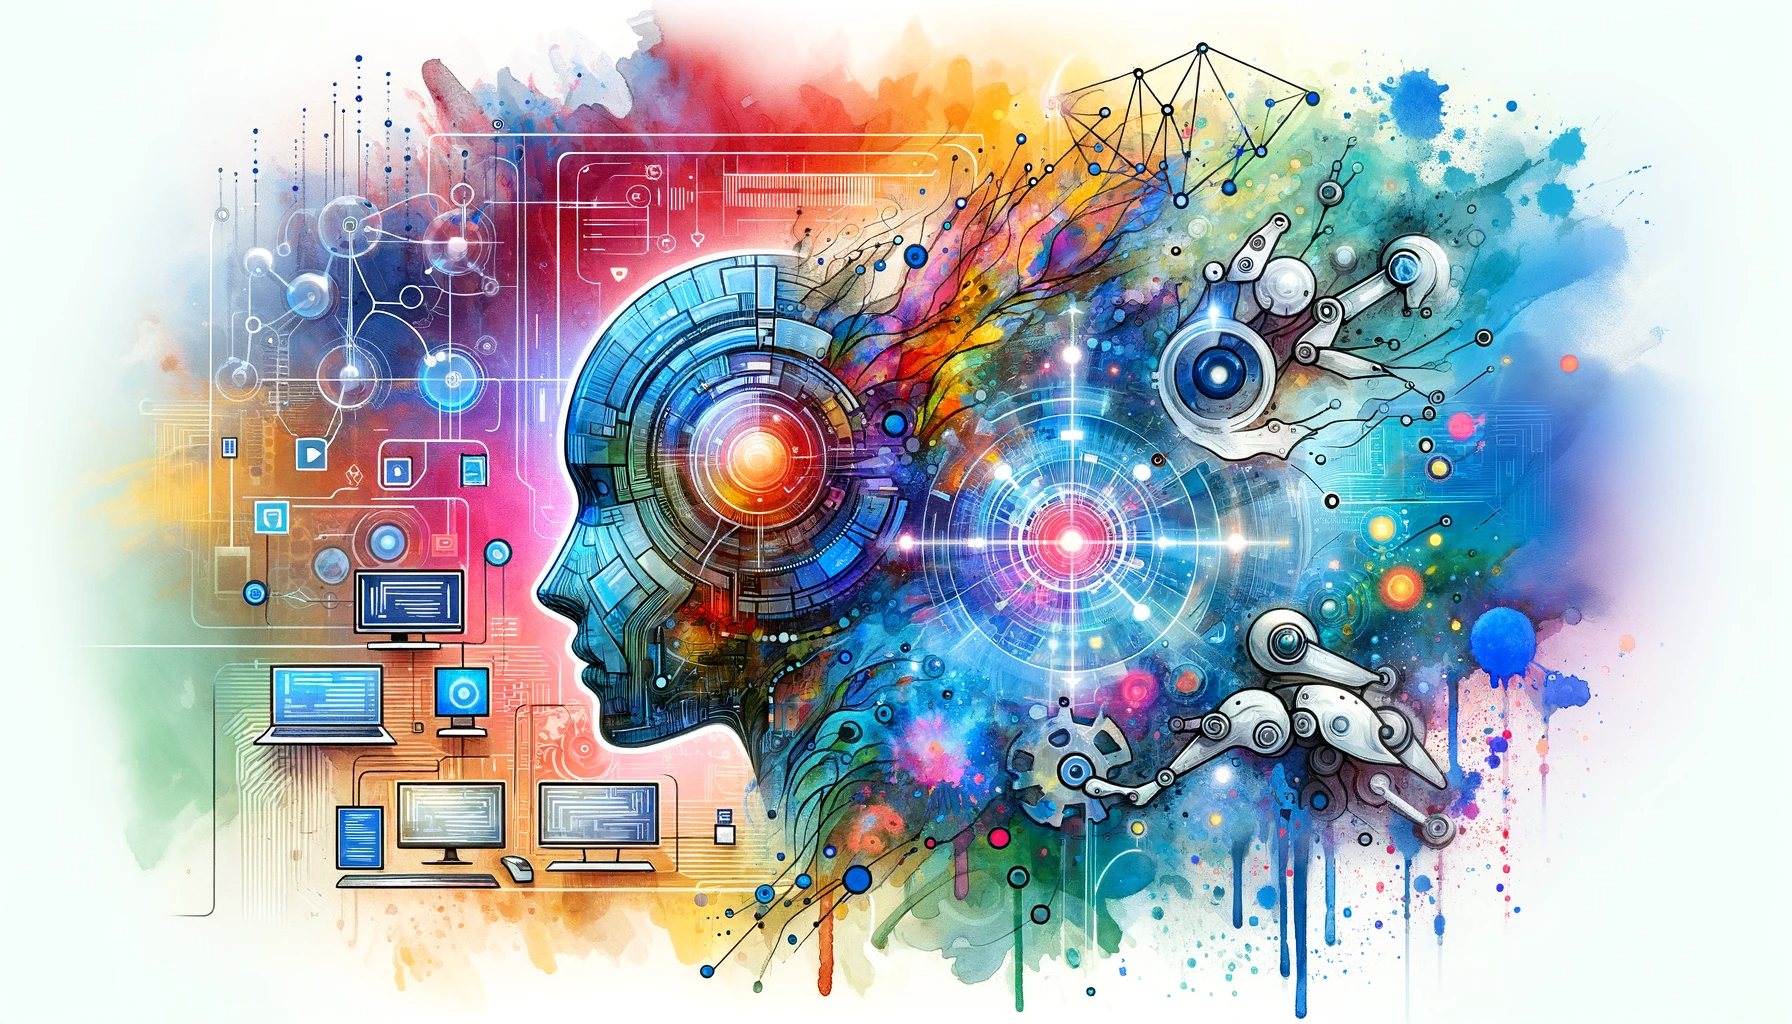 The image depicts a colorful, artistic representation of a robotic head profile, blending technology motifs with vibrant watercolor splashes and abstract elements.